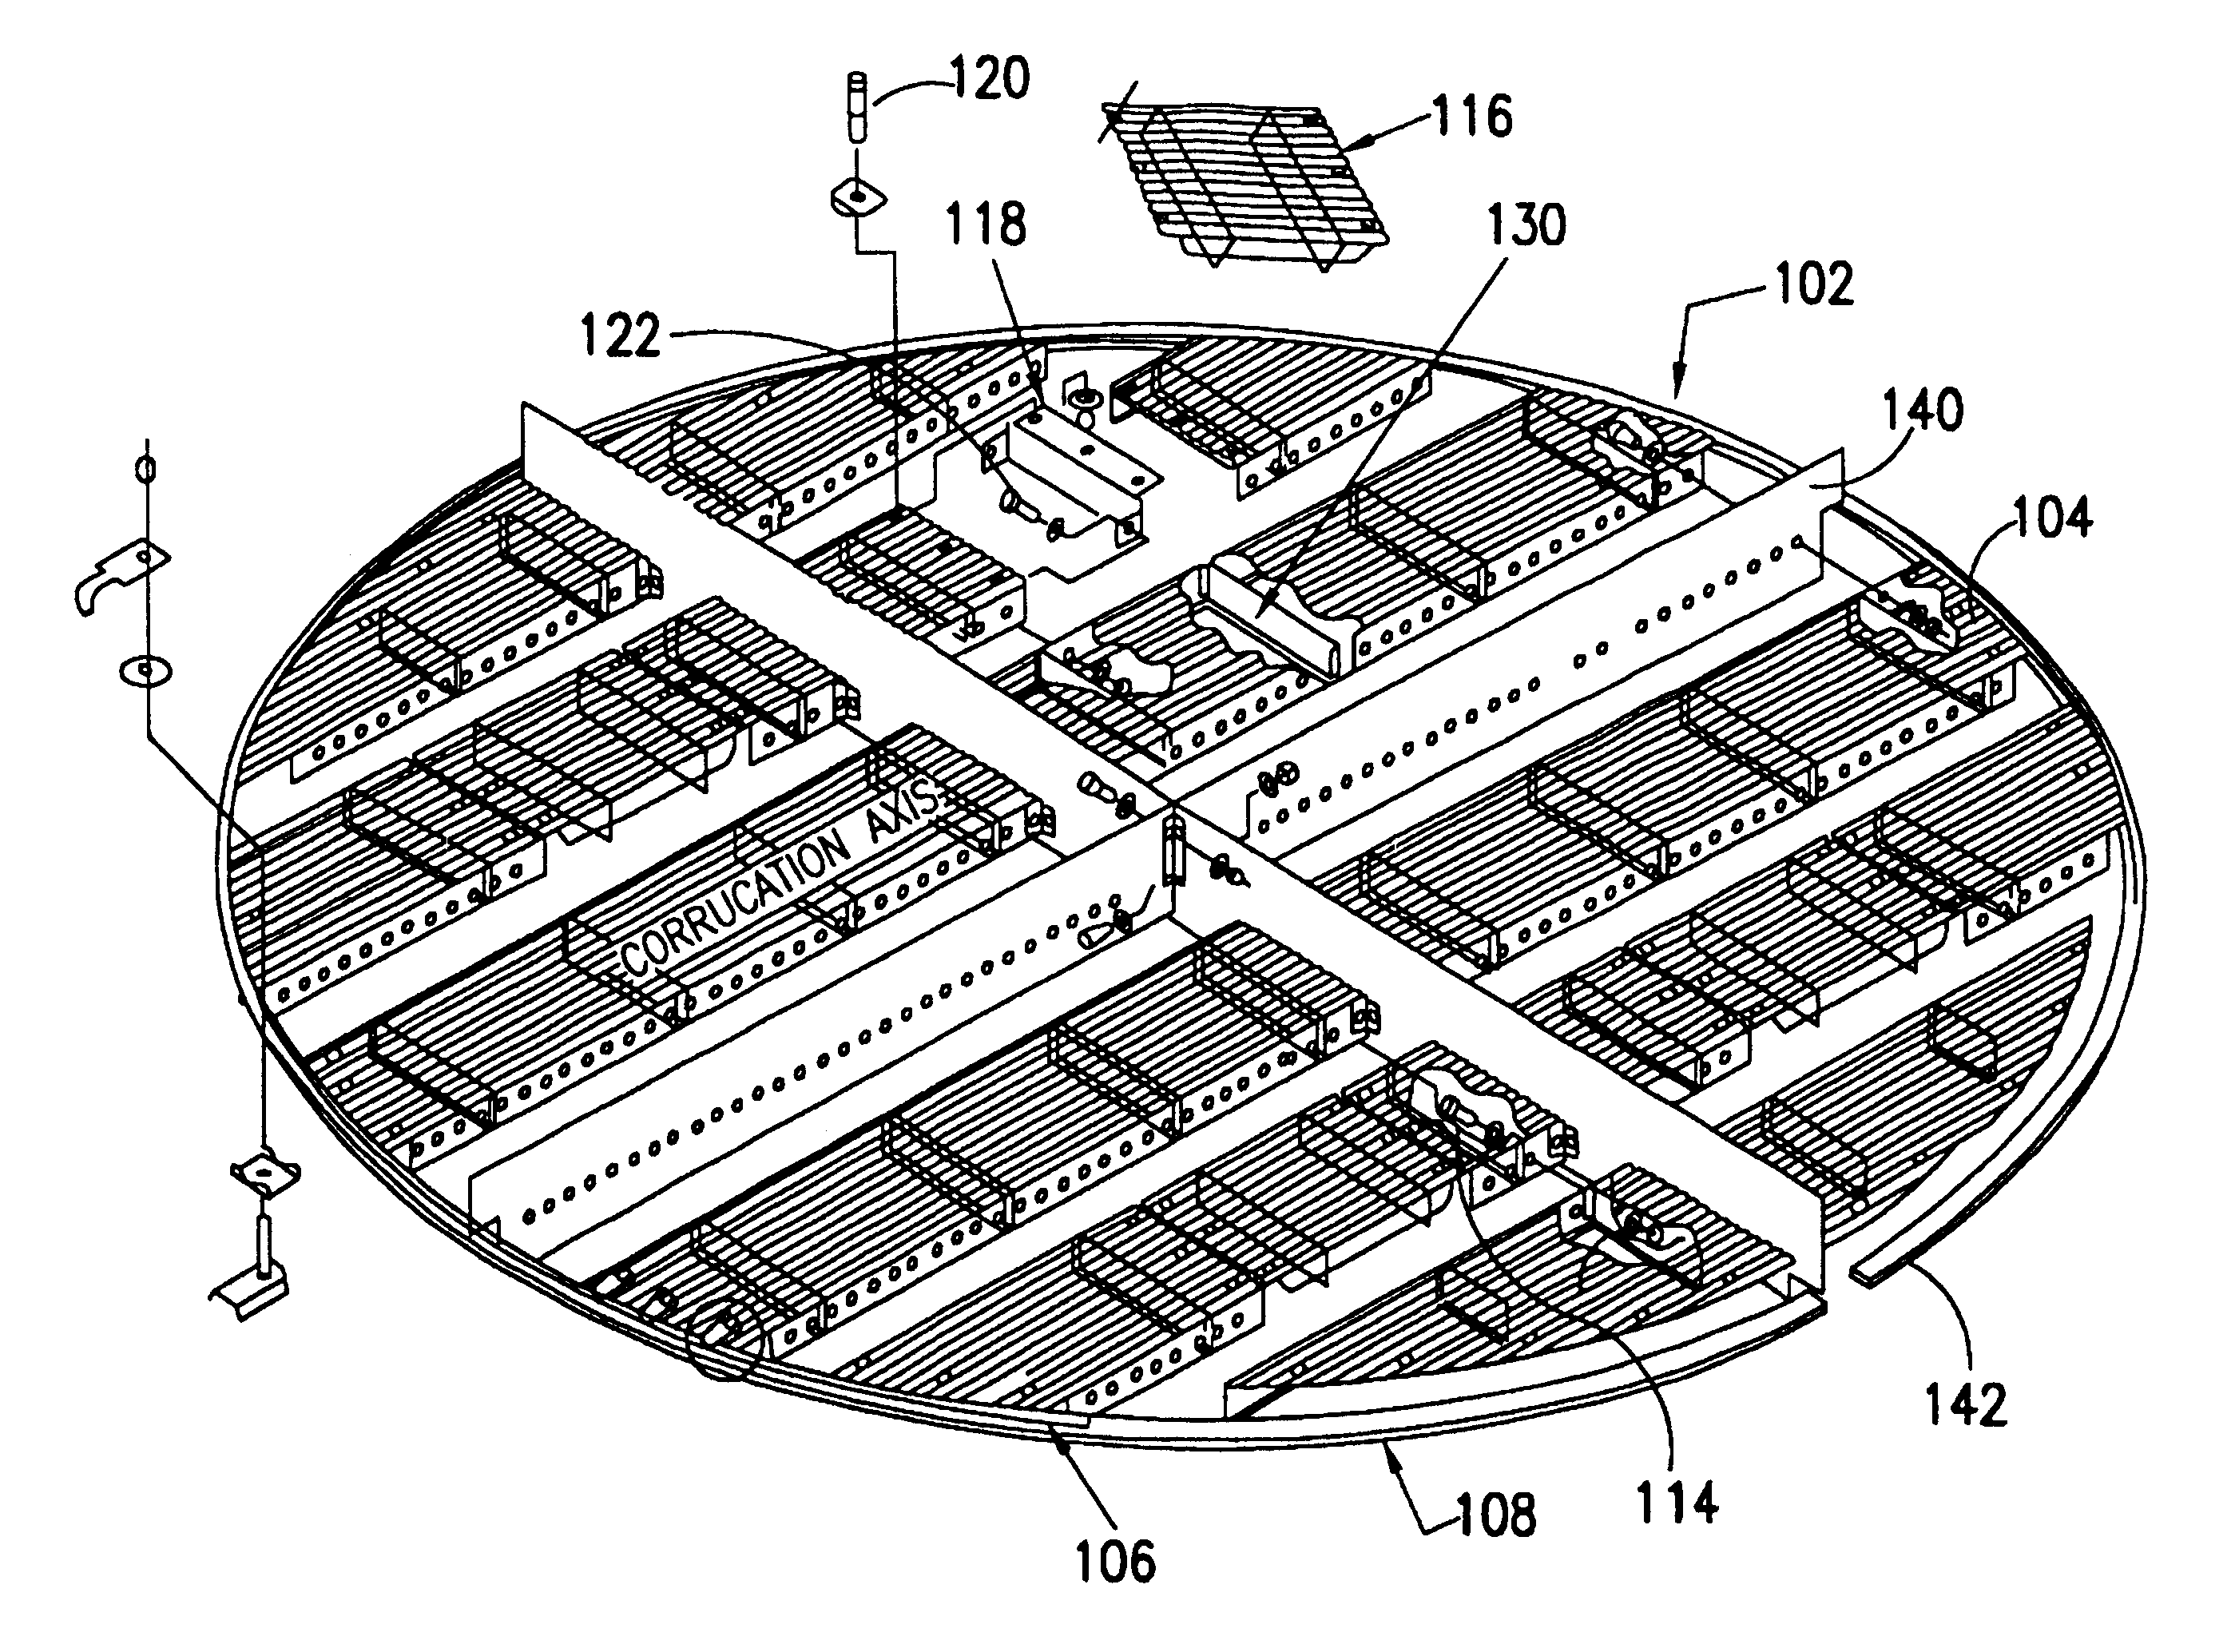 Advanced tray support system using orthogonal grillage